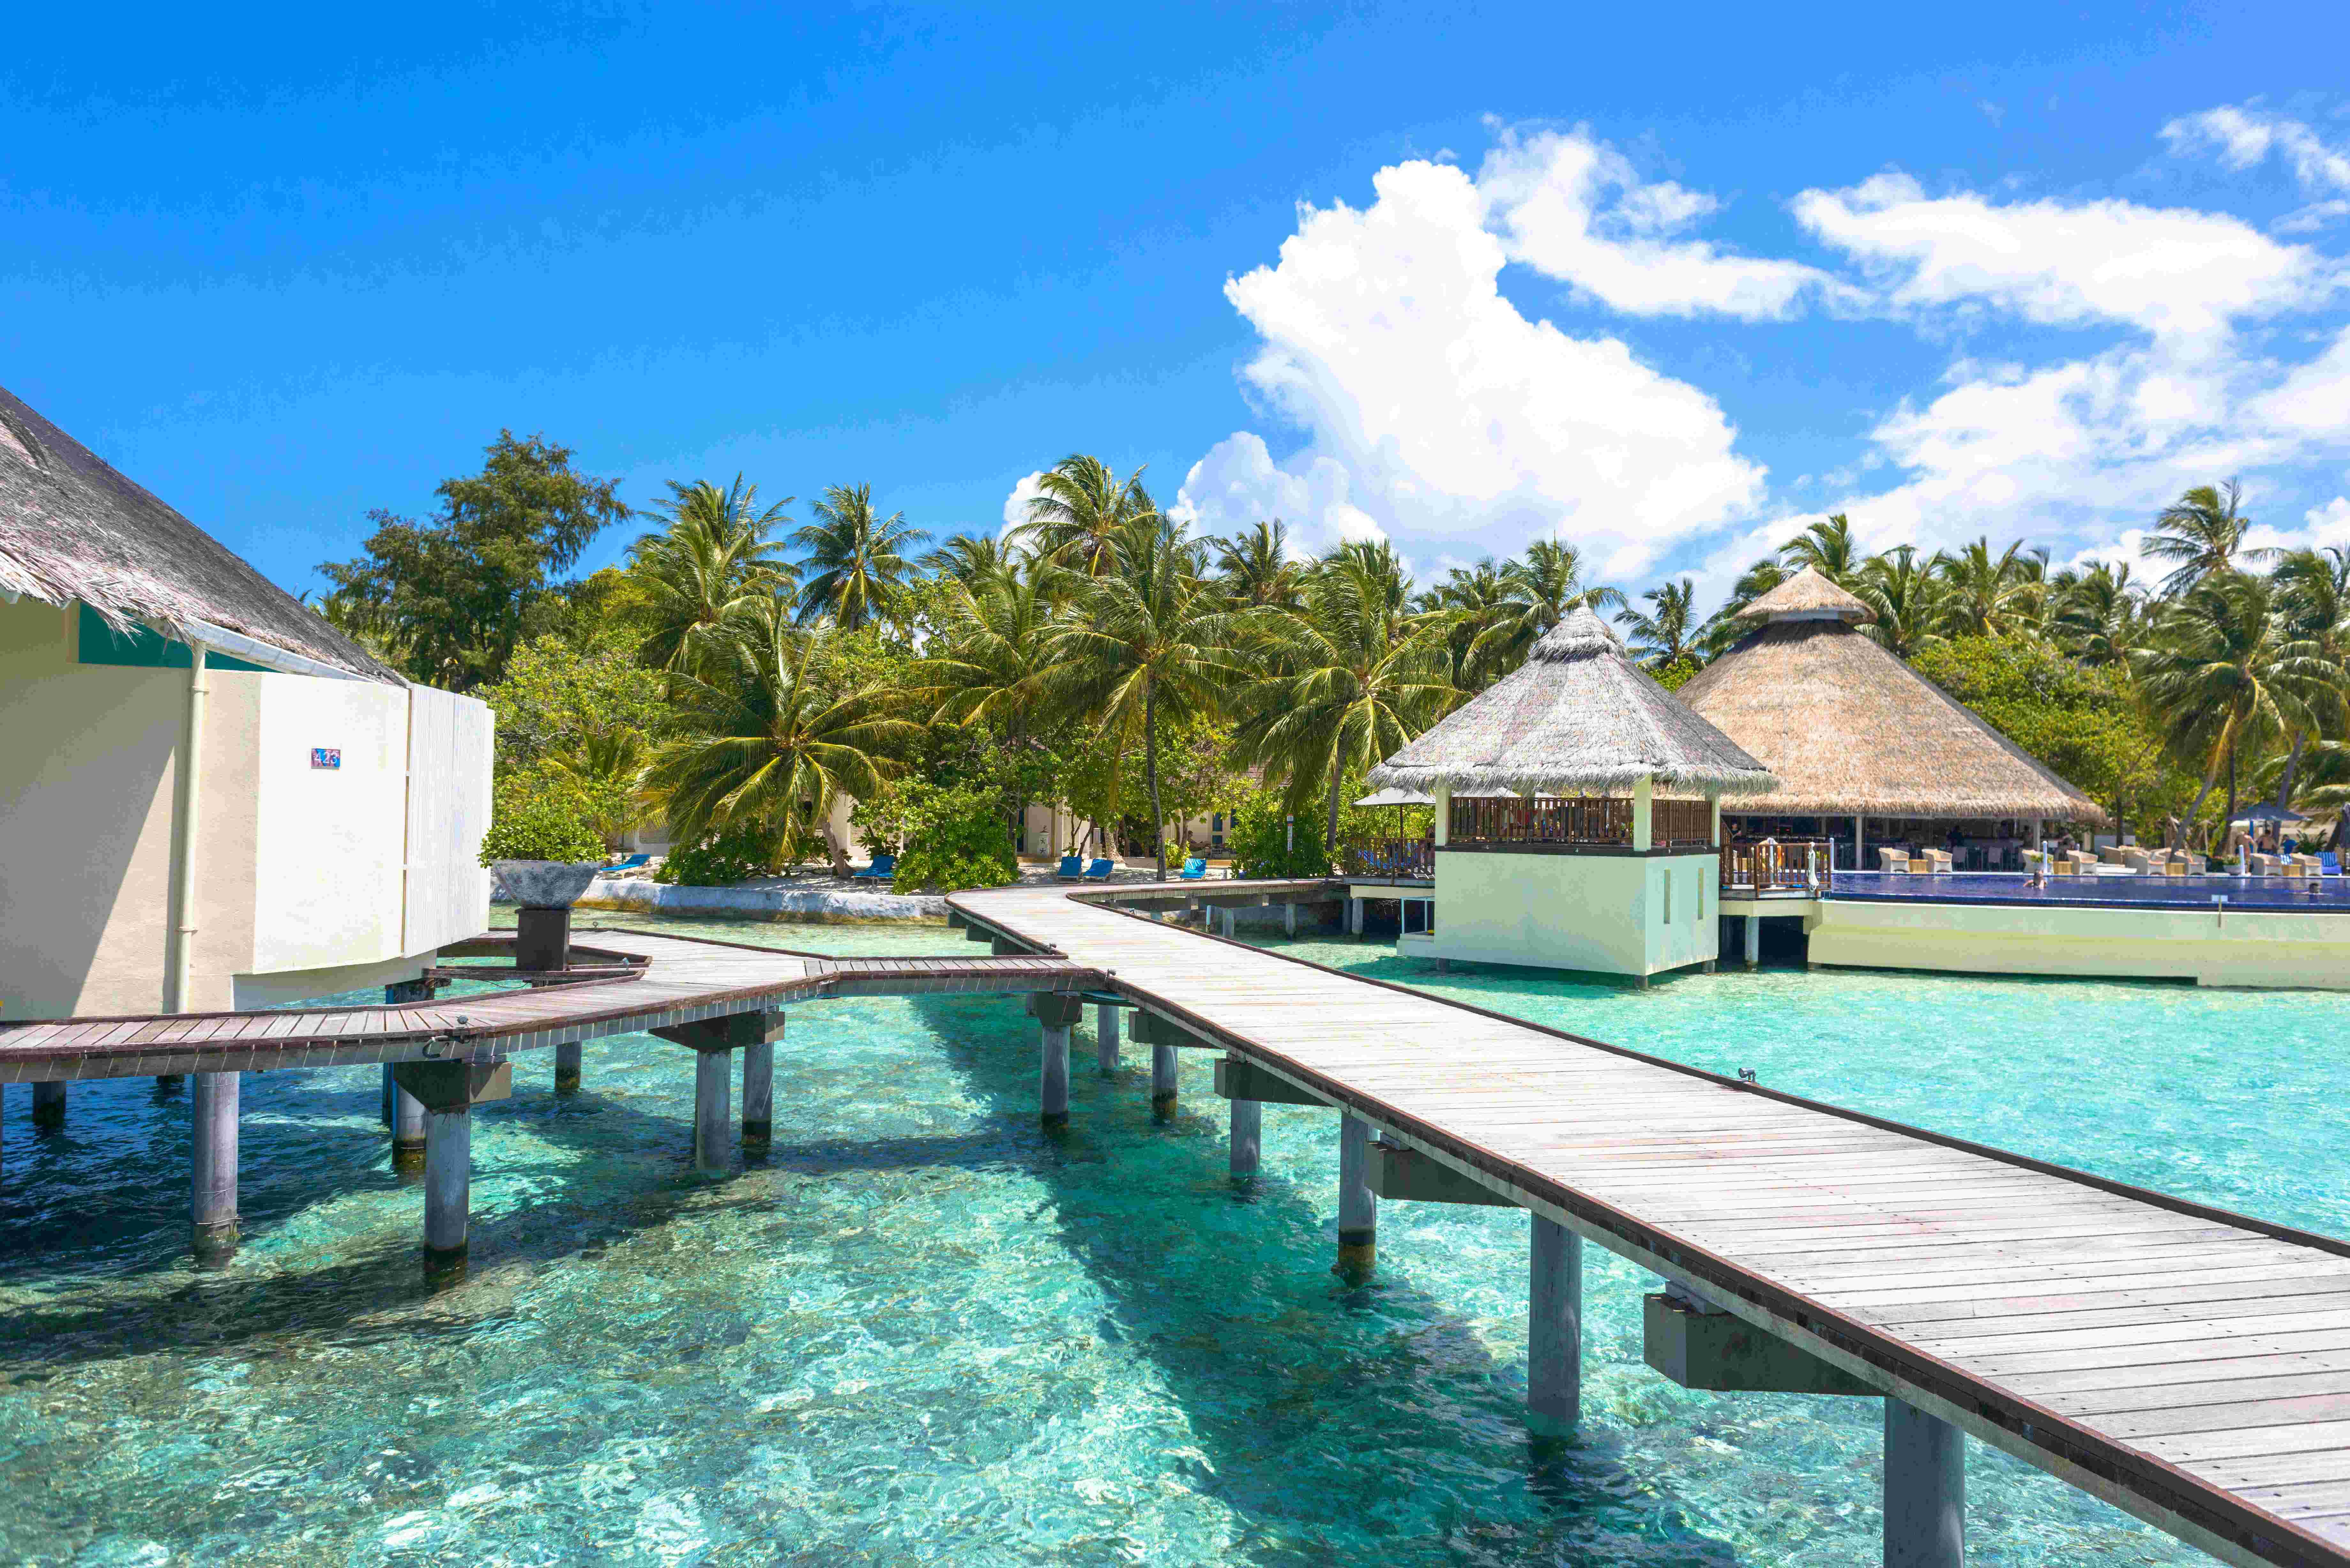  Maldives Tour Packages From India for couples ! UPTO 40% OFF - Viz Travels